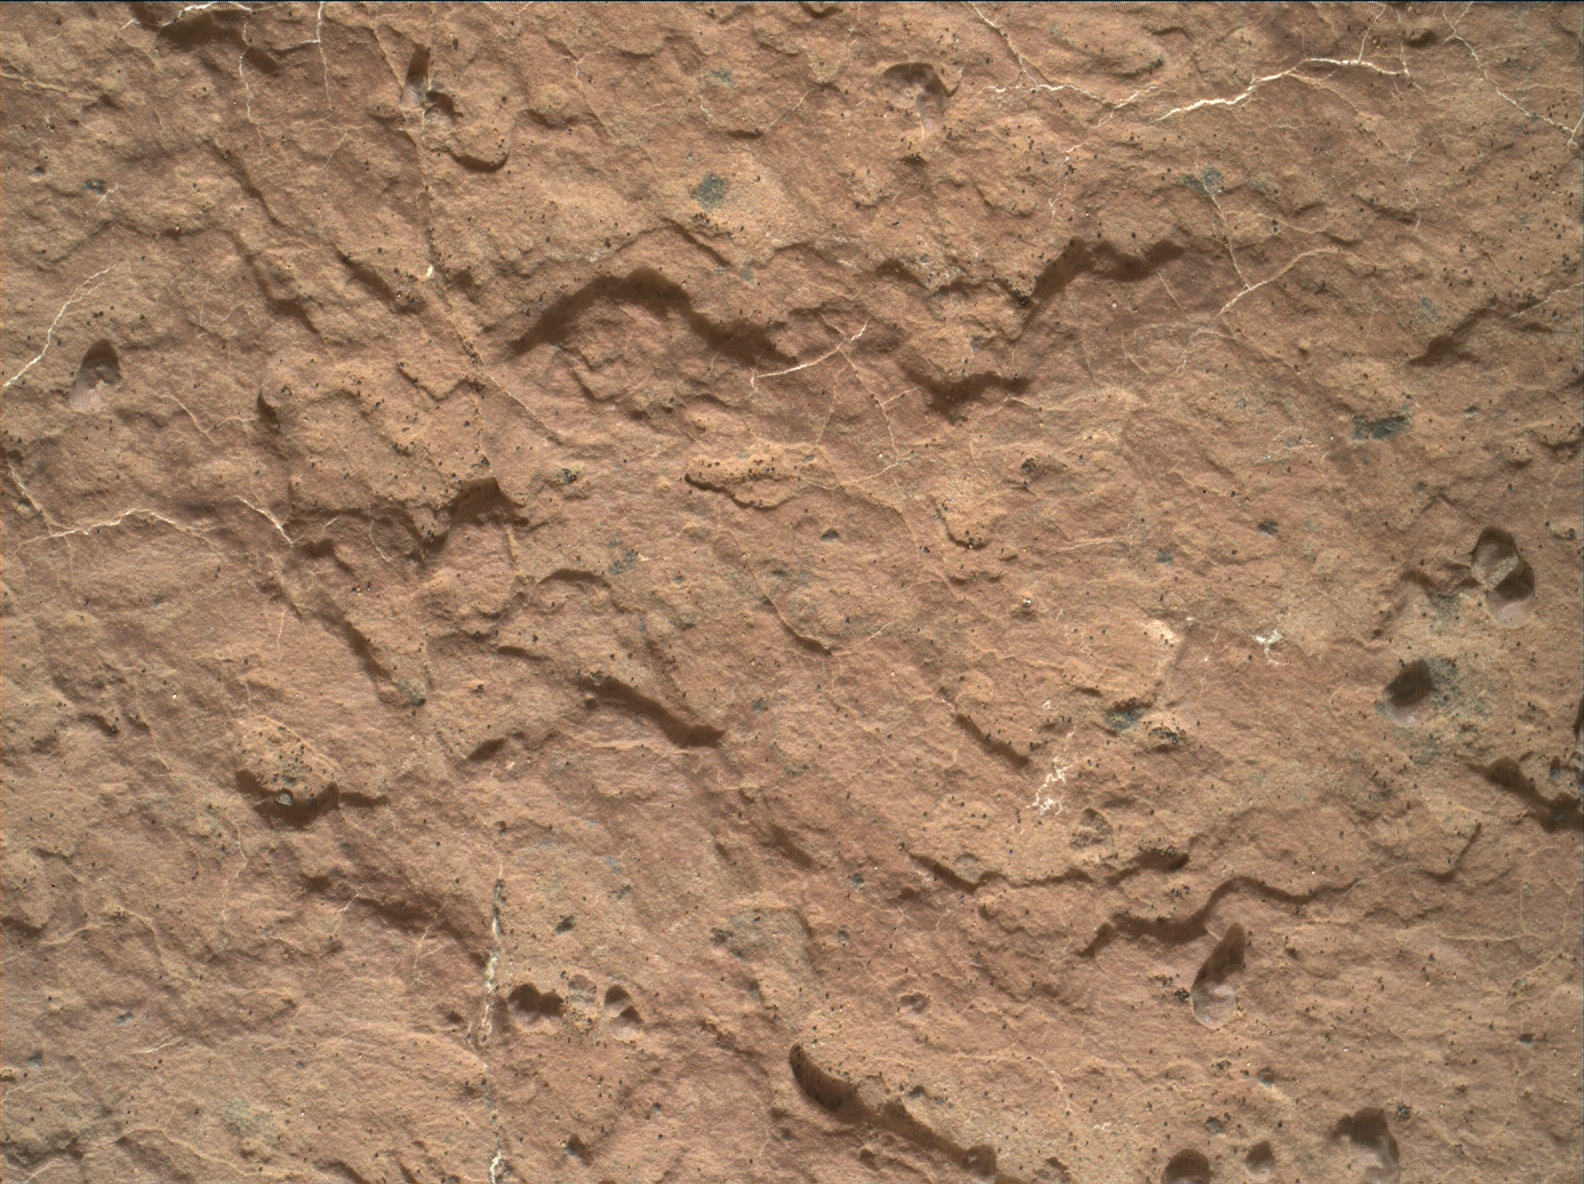 Nasa's Mars rover Curiosity acquired this image using its Mars Hand Lens Imager (MAHLI) on Sol 1601